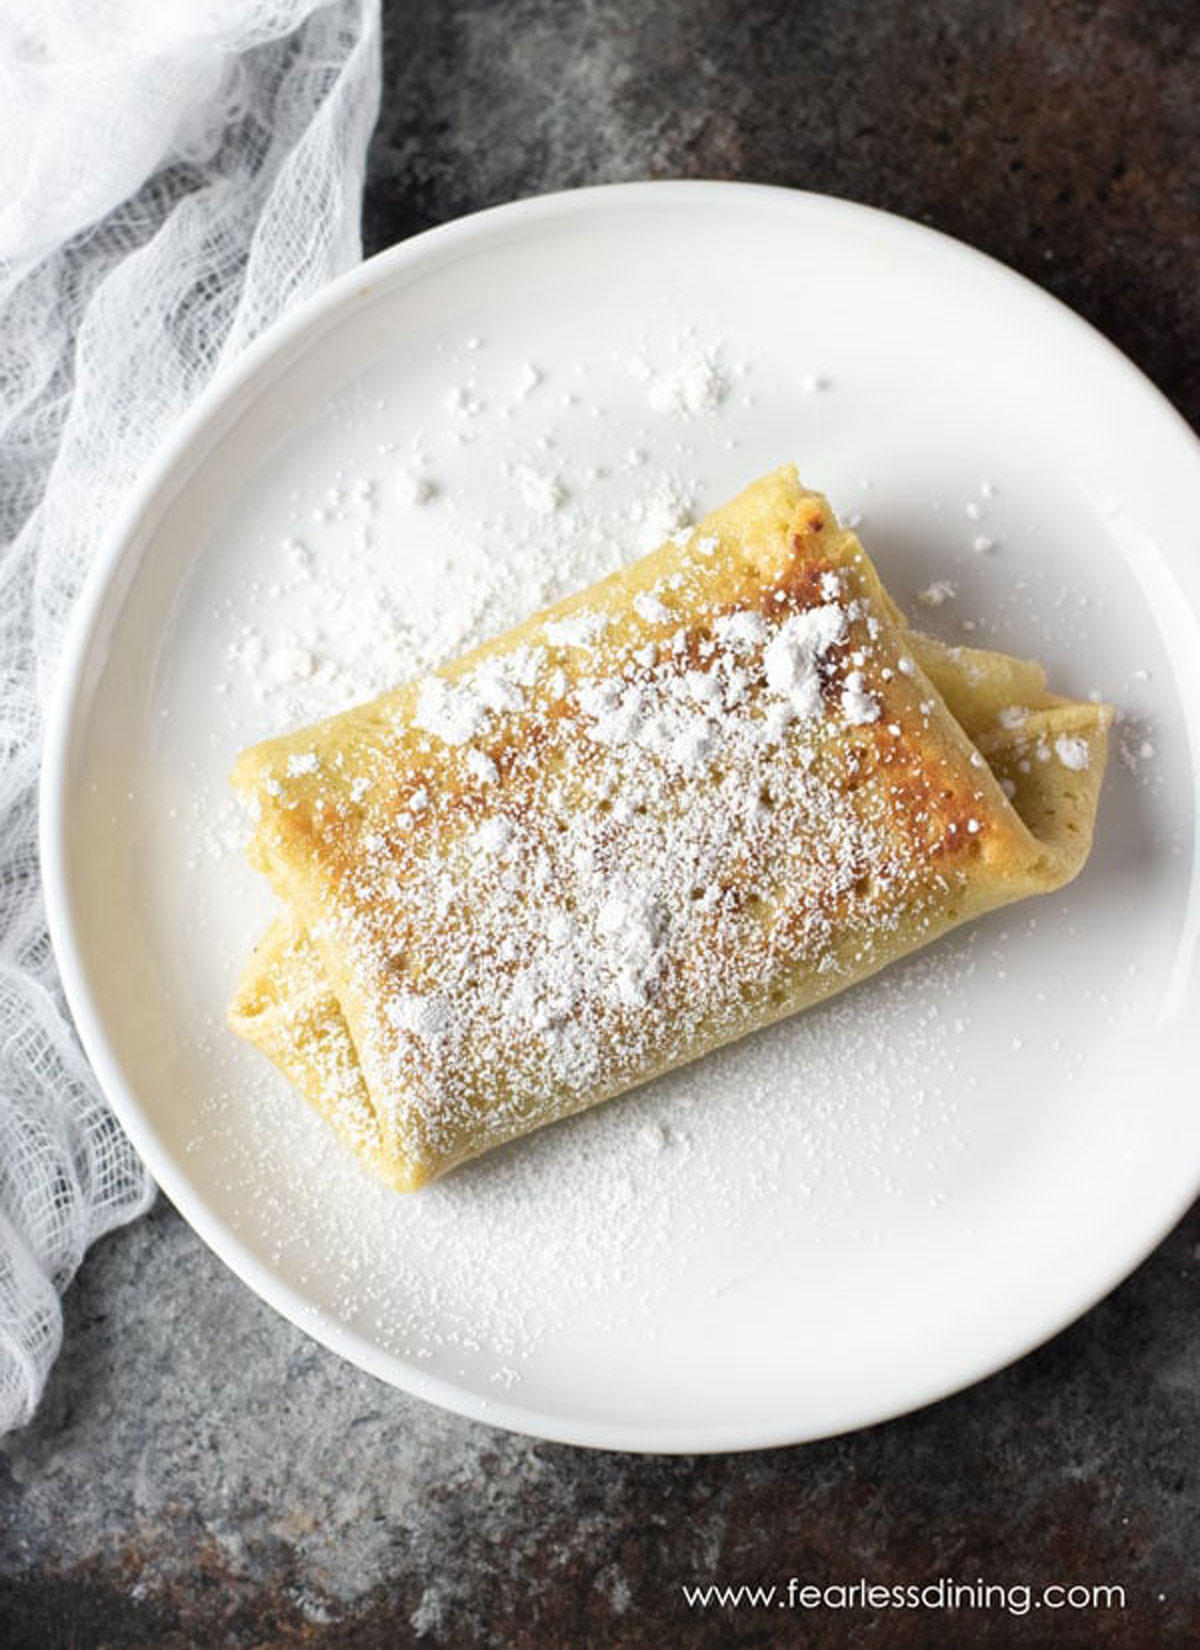 the top view of a cooked blintz dusted with powdered sugar